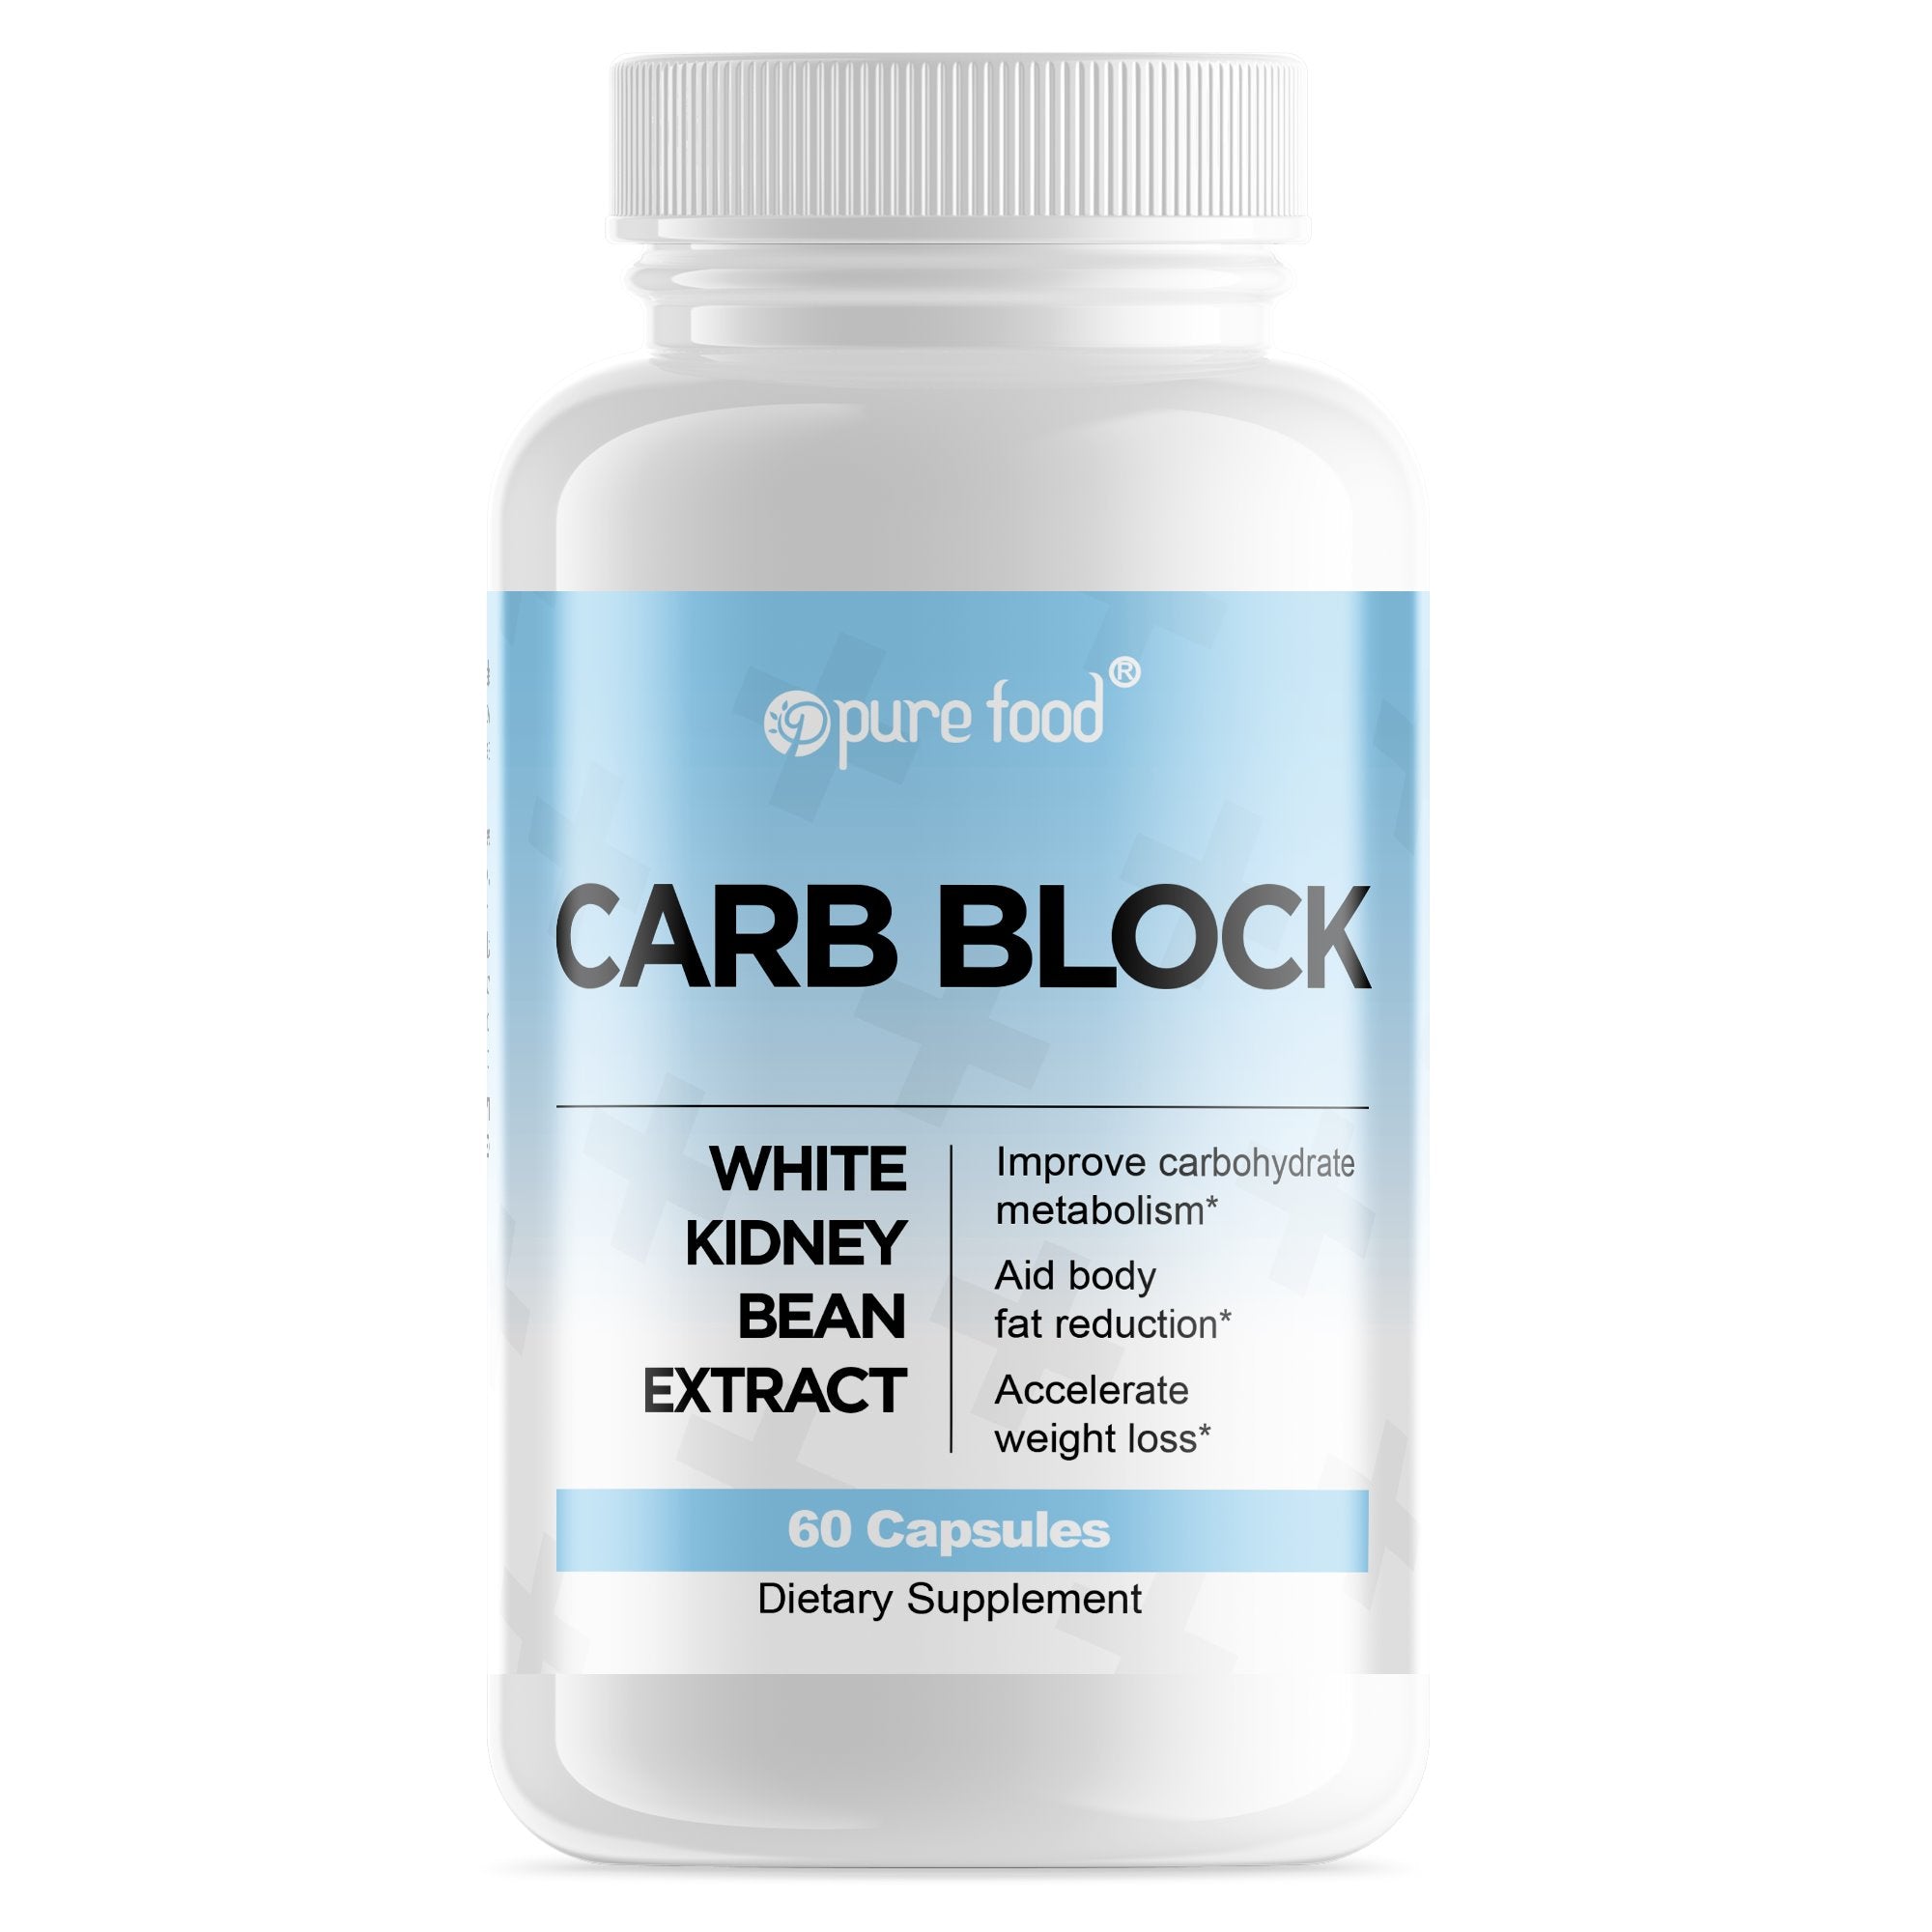 Pure Food CARB BLOCK (White Kidney Bean Extract) - 60 Capsules Weight loss Pure Food Digestive Health 